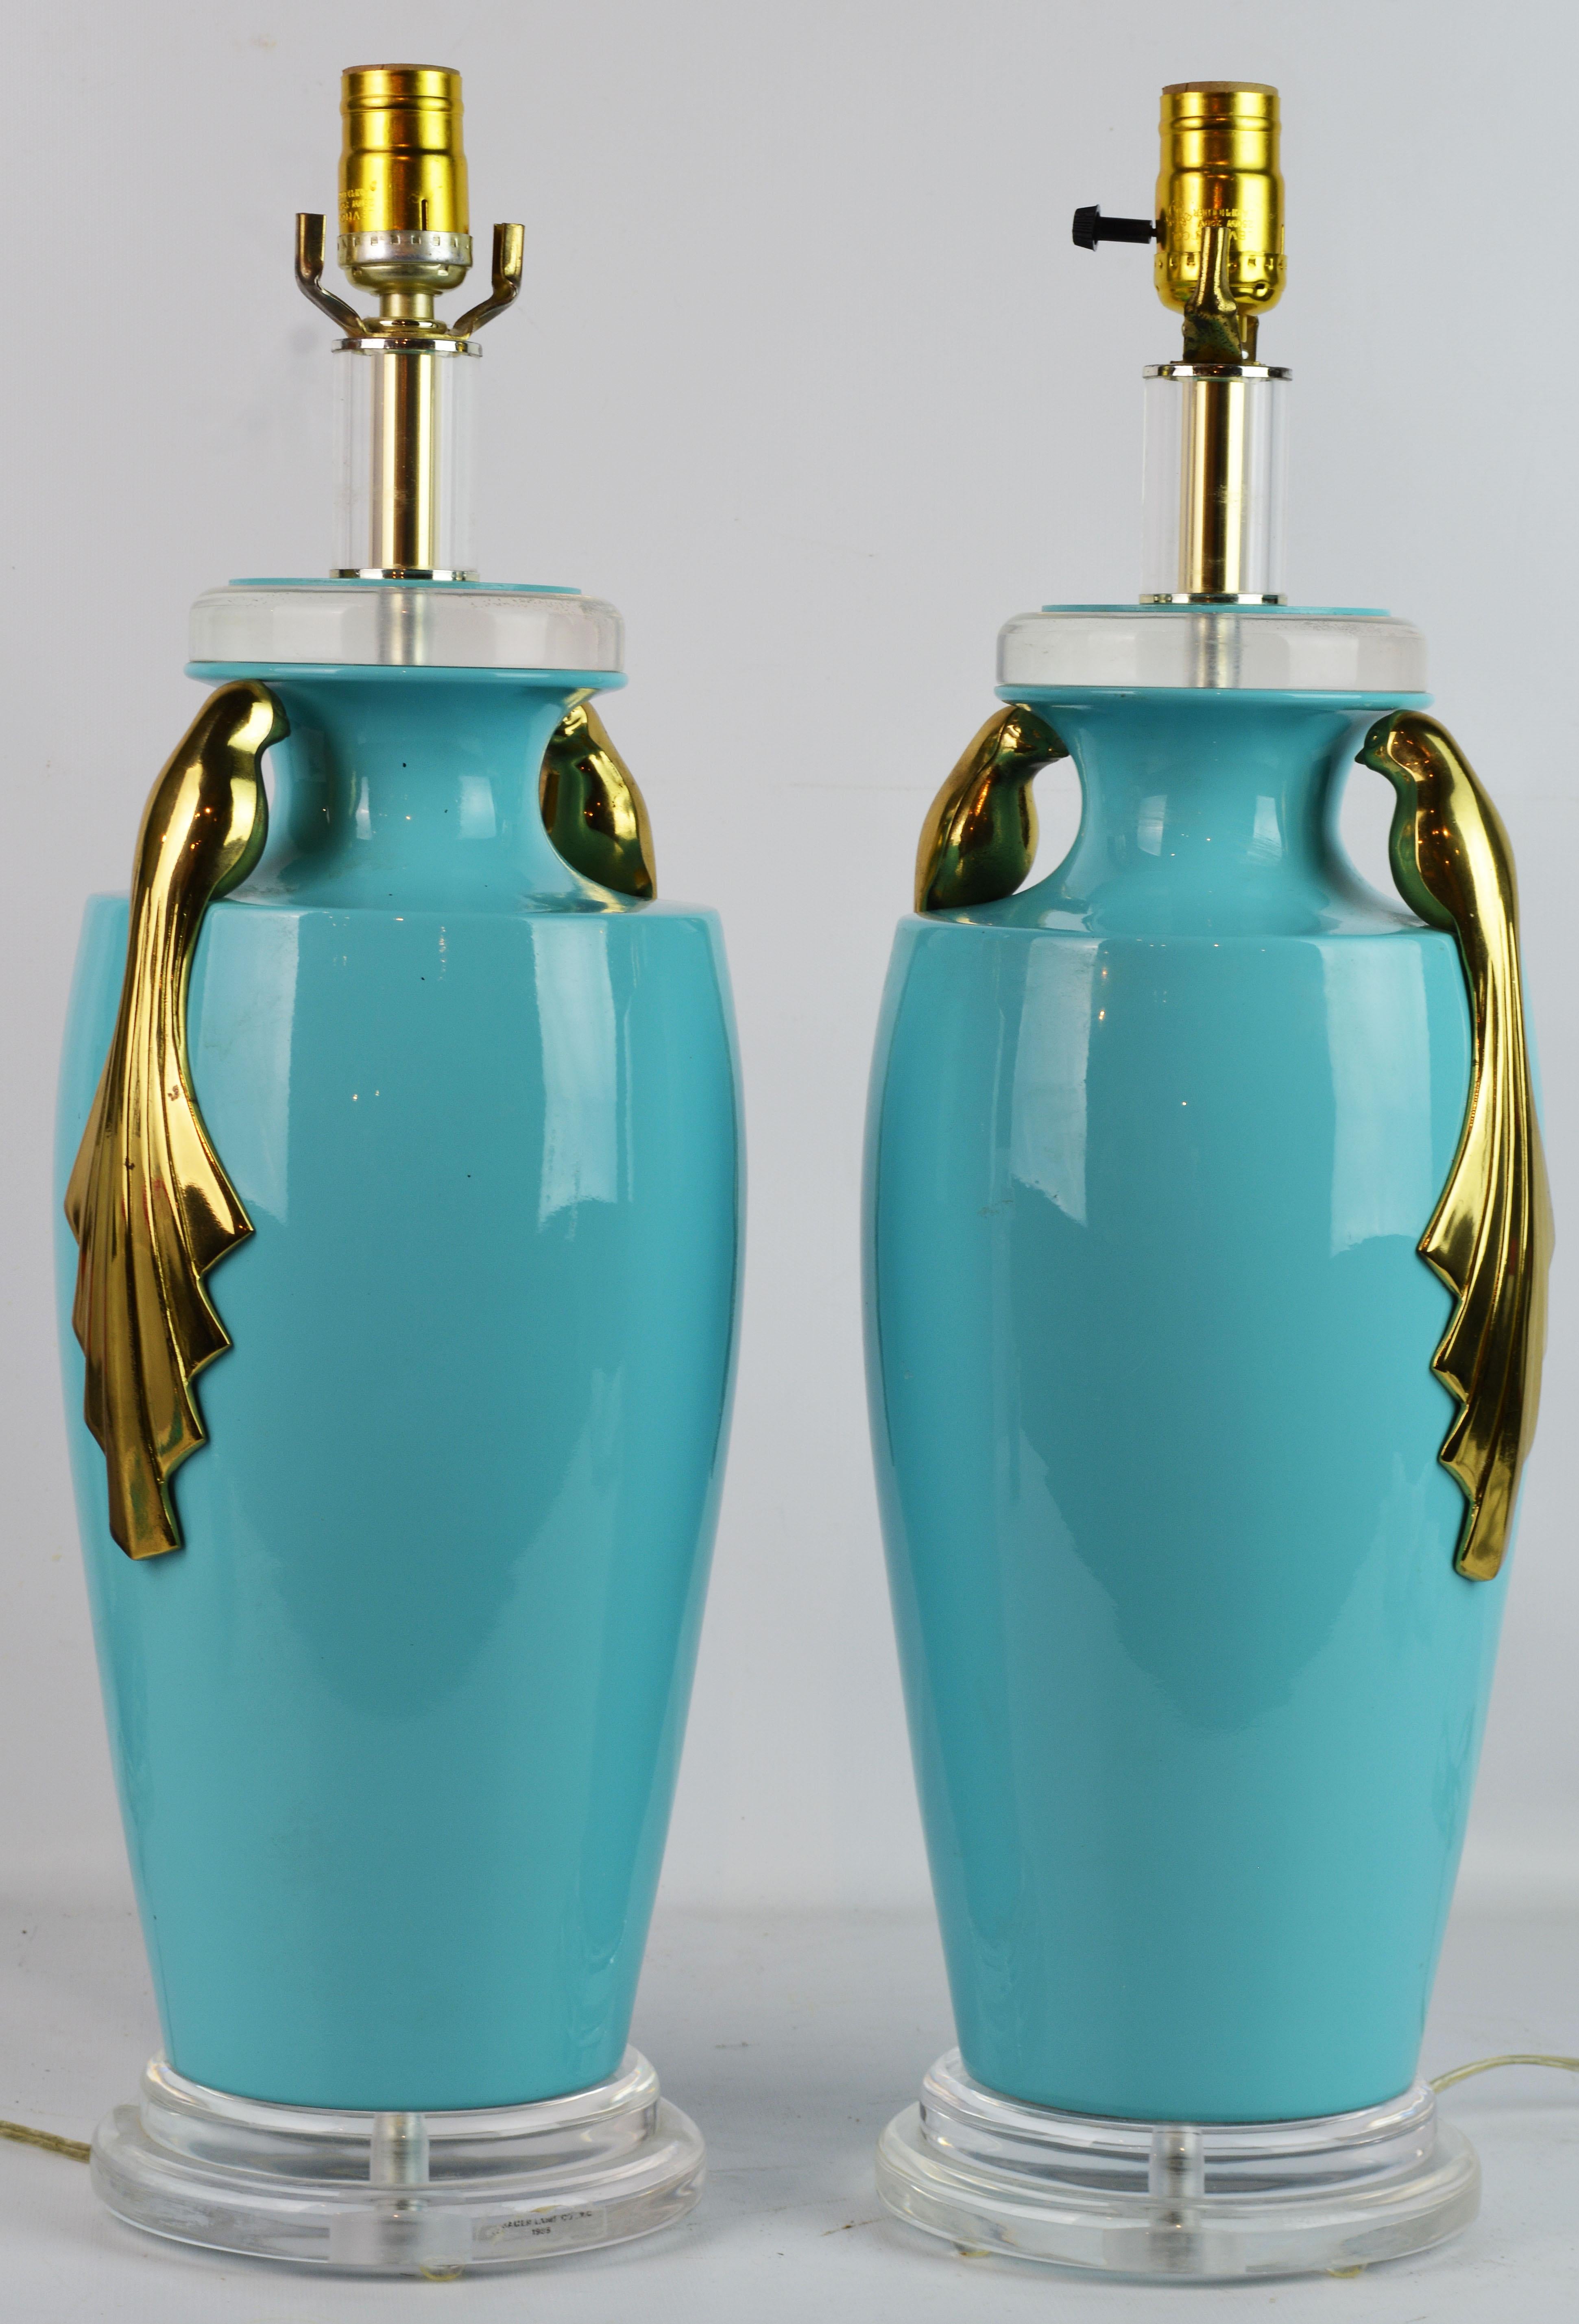 These Art Deco style table lamps by Bauer Lamp Company features Tiffany blue ceramic glazed bodies in the shape of Classic urns mounted with double stylized solid brass paradise birds. The lamps have Lucite bases and tops making the overall